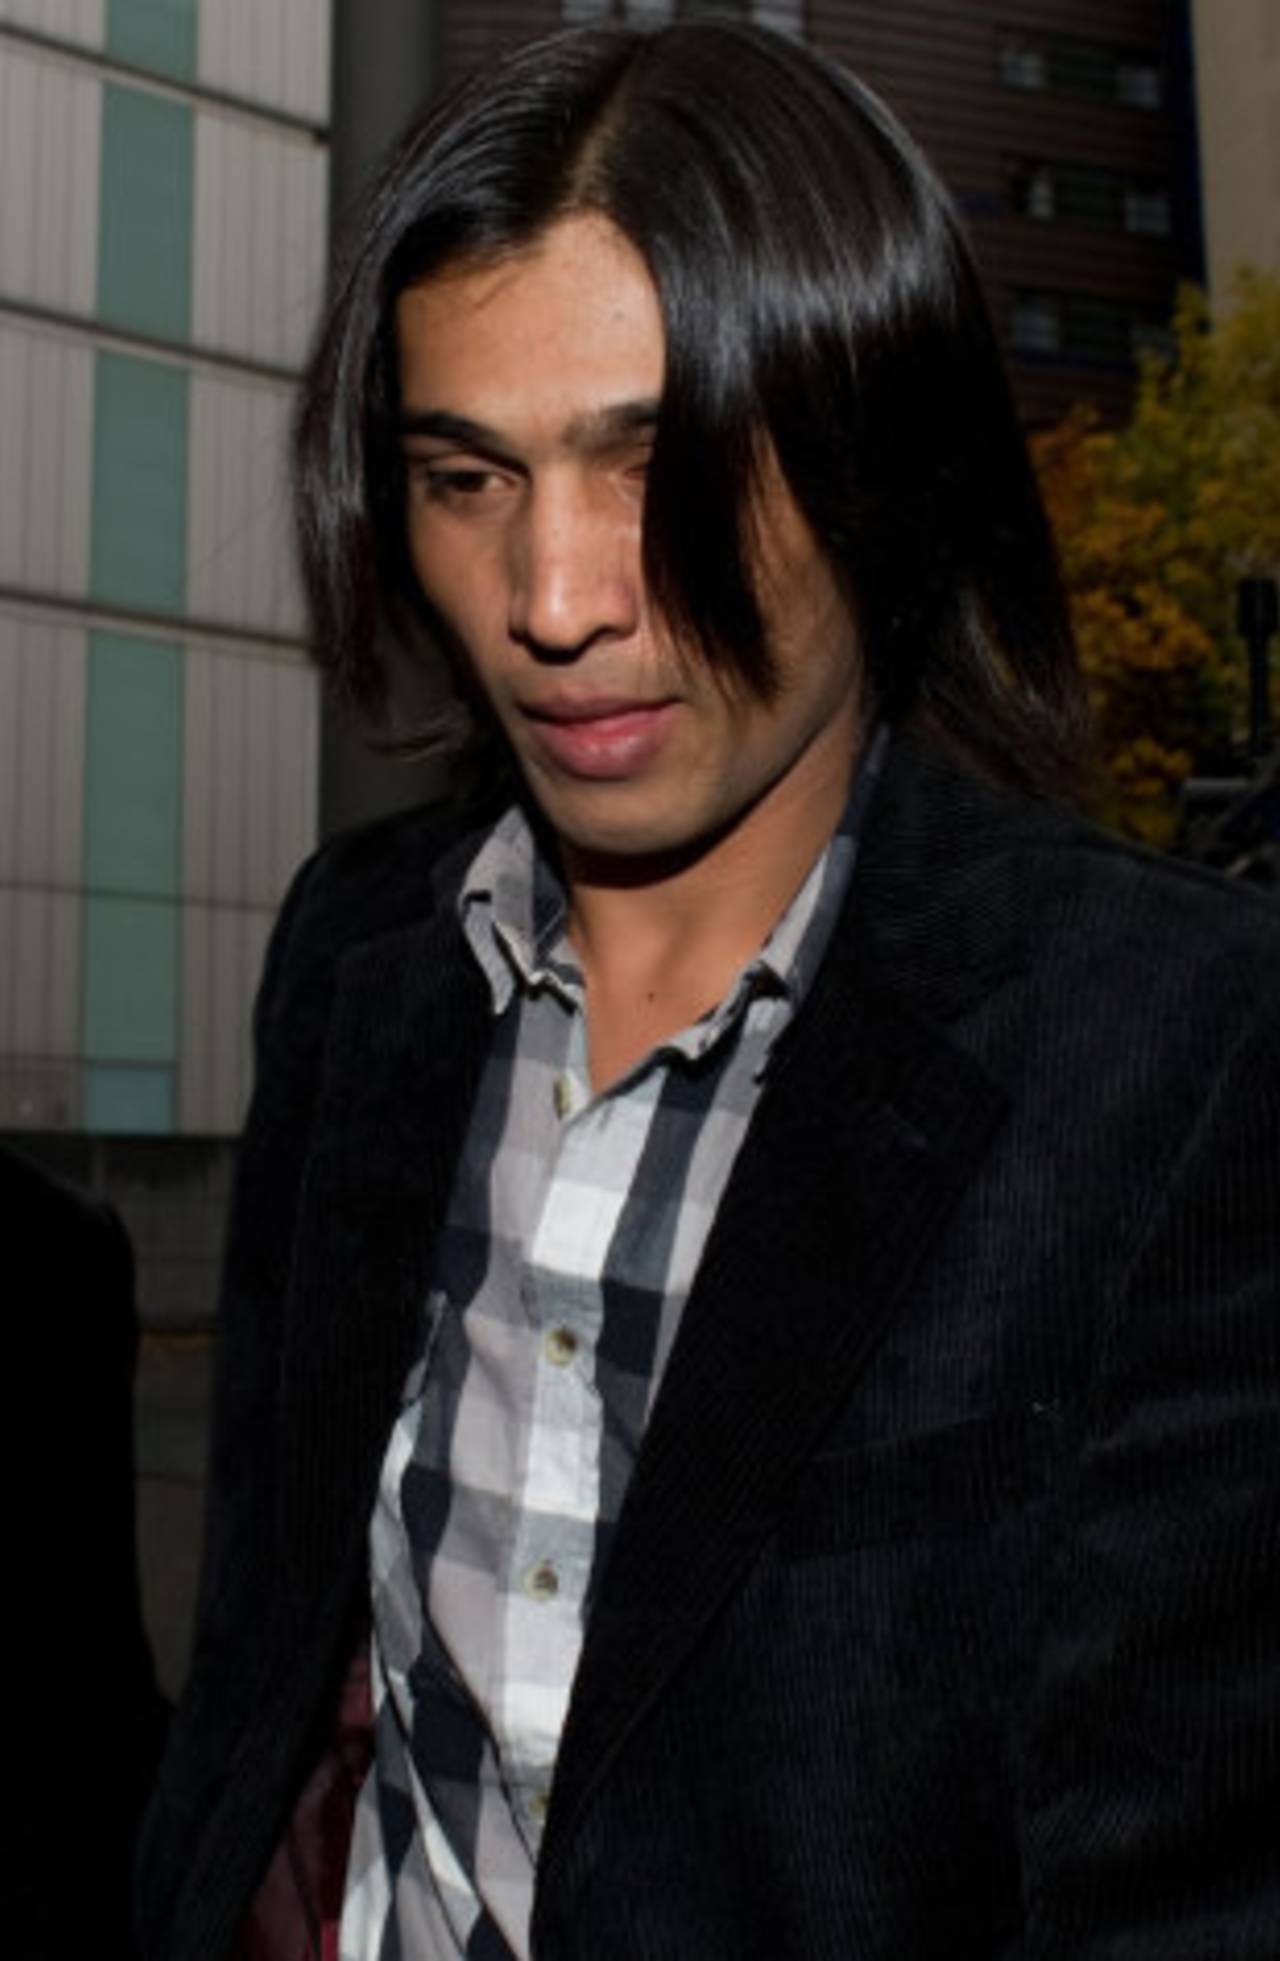 Mohammad Amir arrives at Southwark Crown Court to be sentenced, London, November 3, 2011